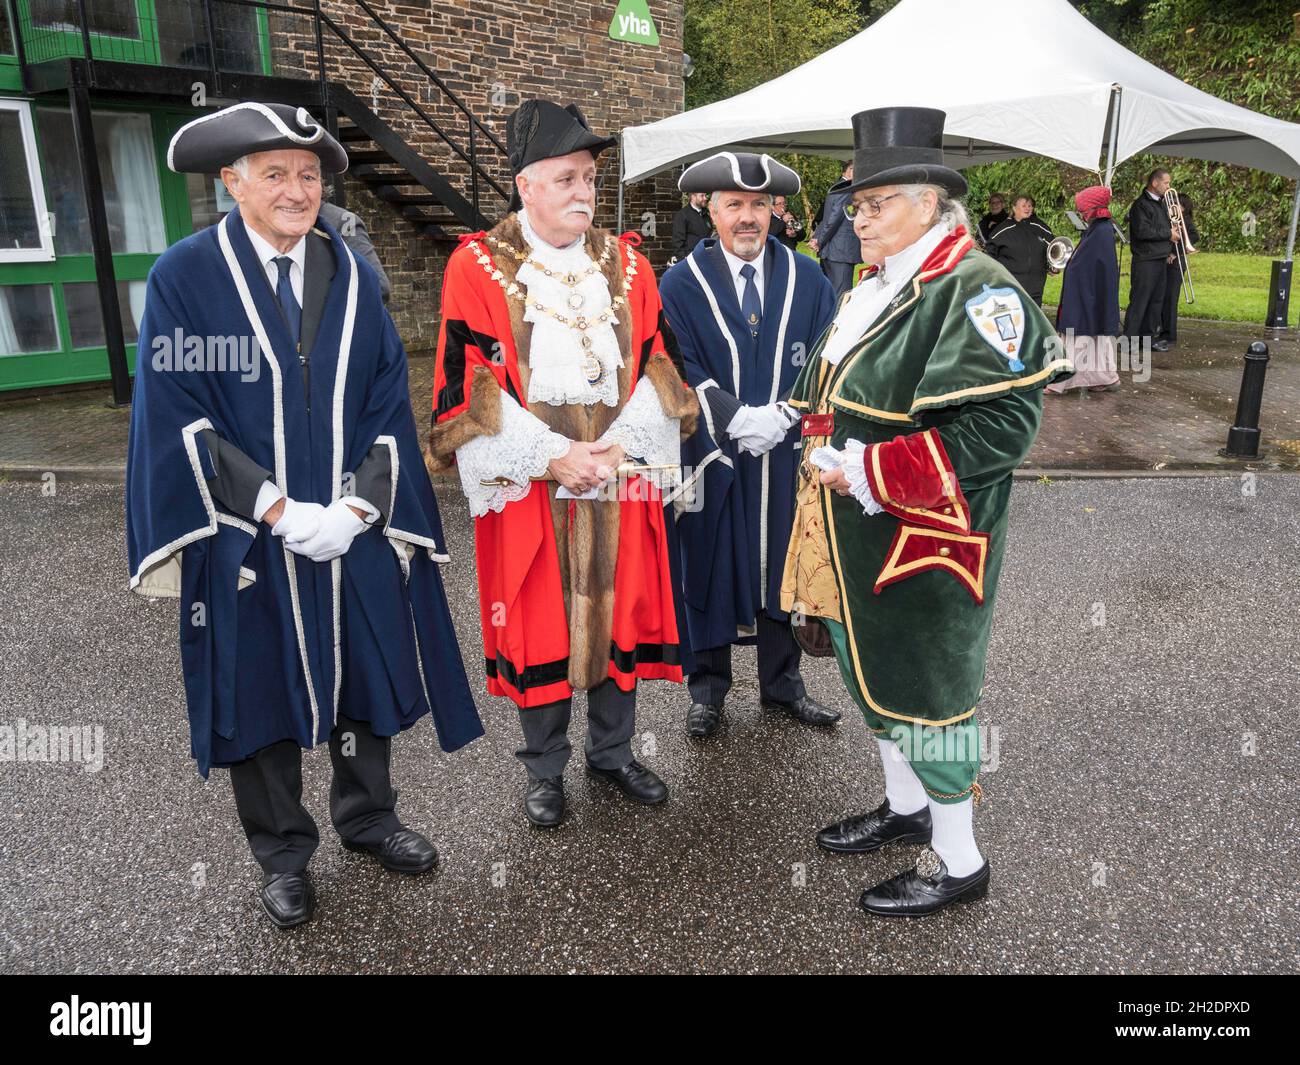 Costumed celebration marking 150 years of rail in Okehampton, Devon. Mayor Bob Tolley chats with town crier Ros Charlton Chard. Stock Photo